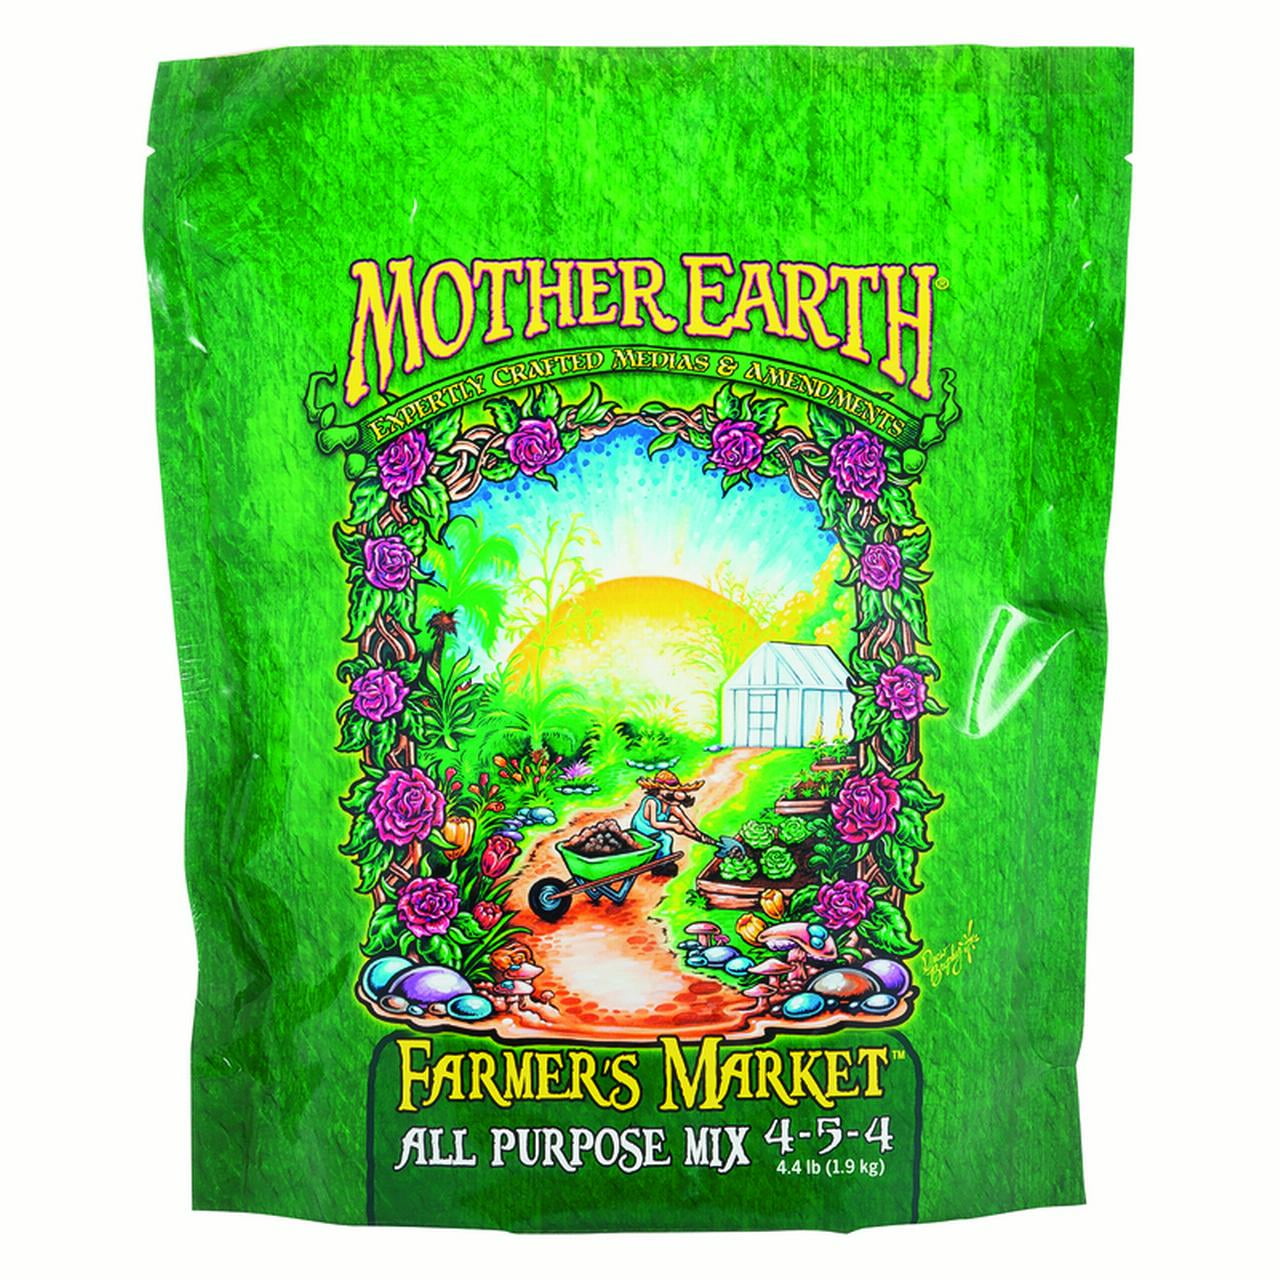 Picture of Mother Earth 7004444 4.4 lbs Farmers Market All Purpose Mix 4-5-4 Hydroponic Plant Nutrients